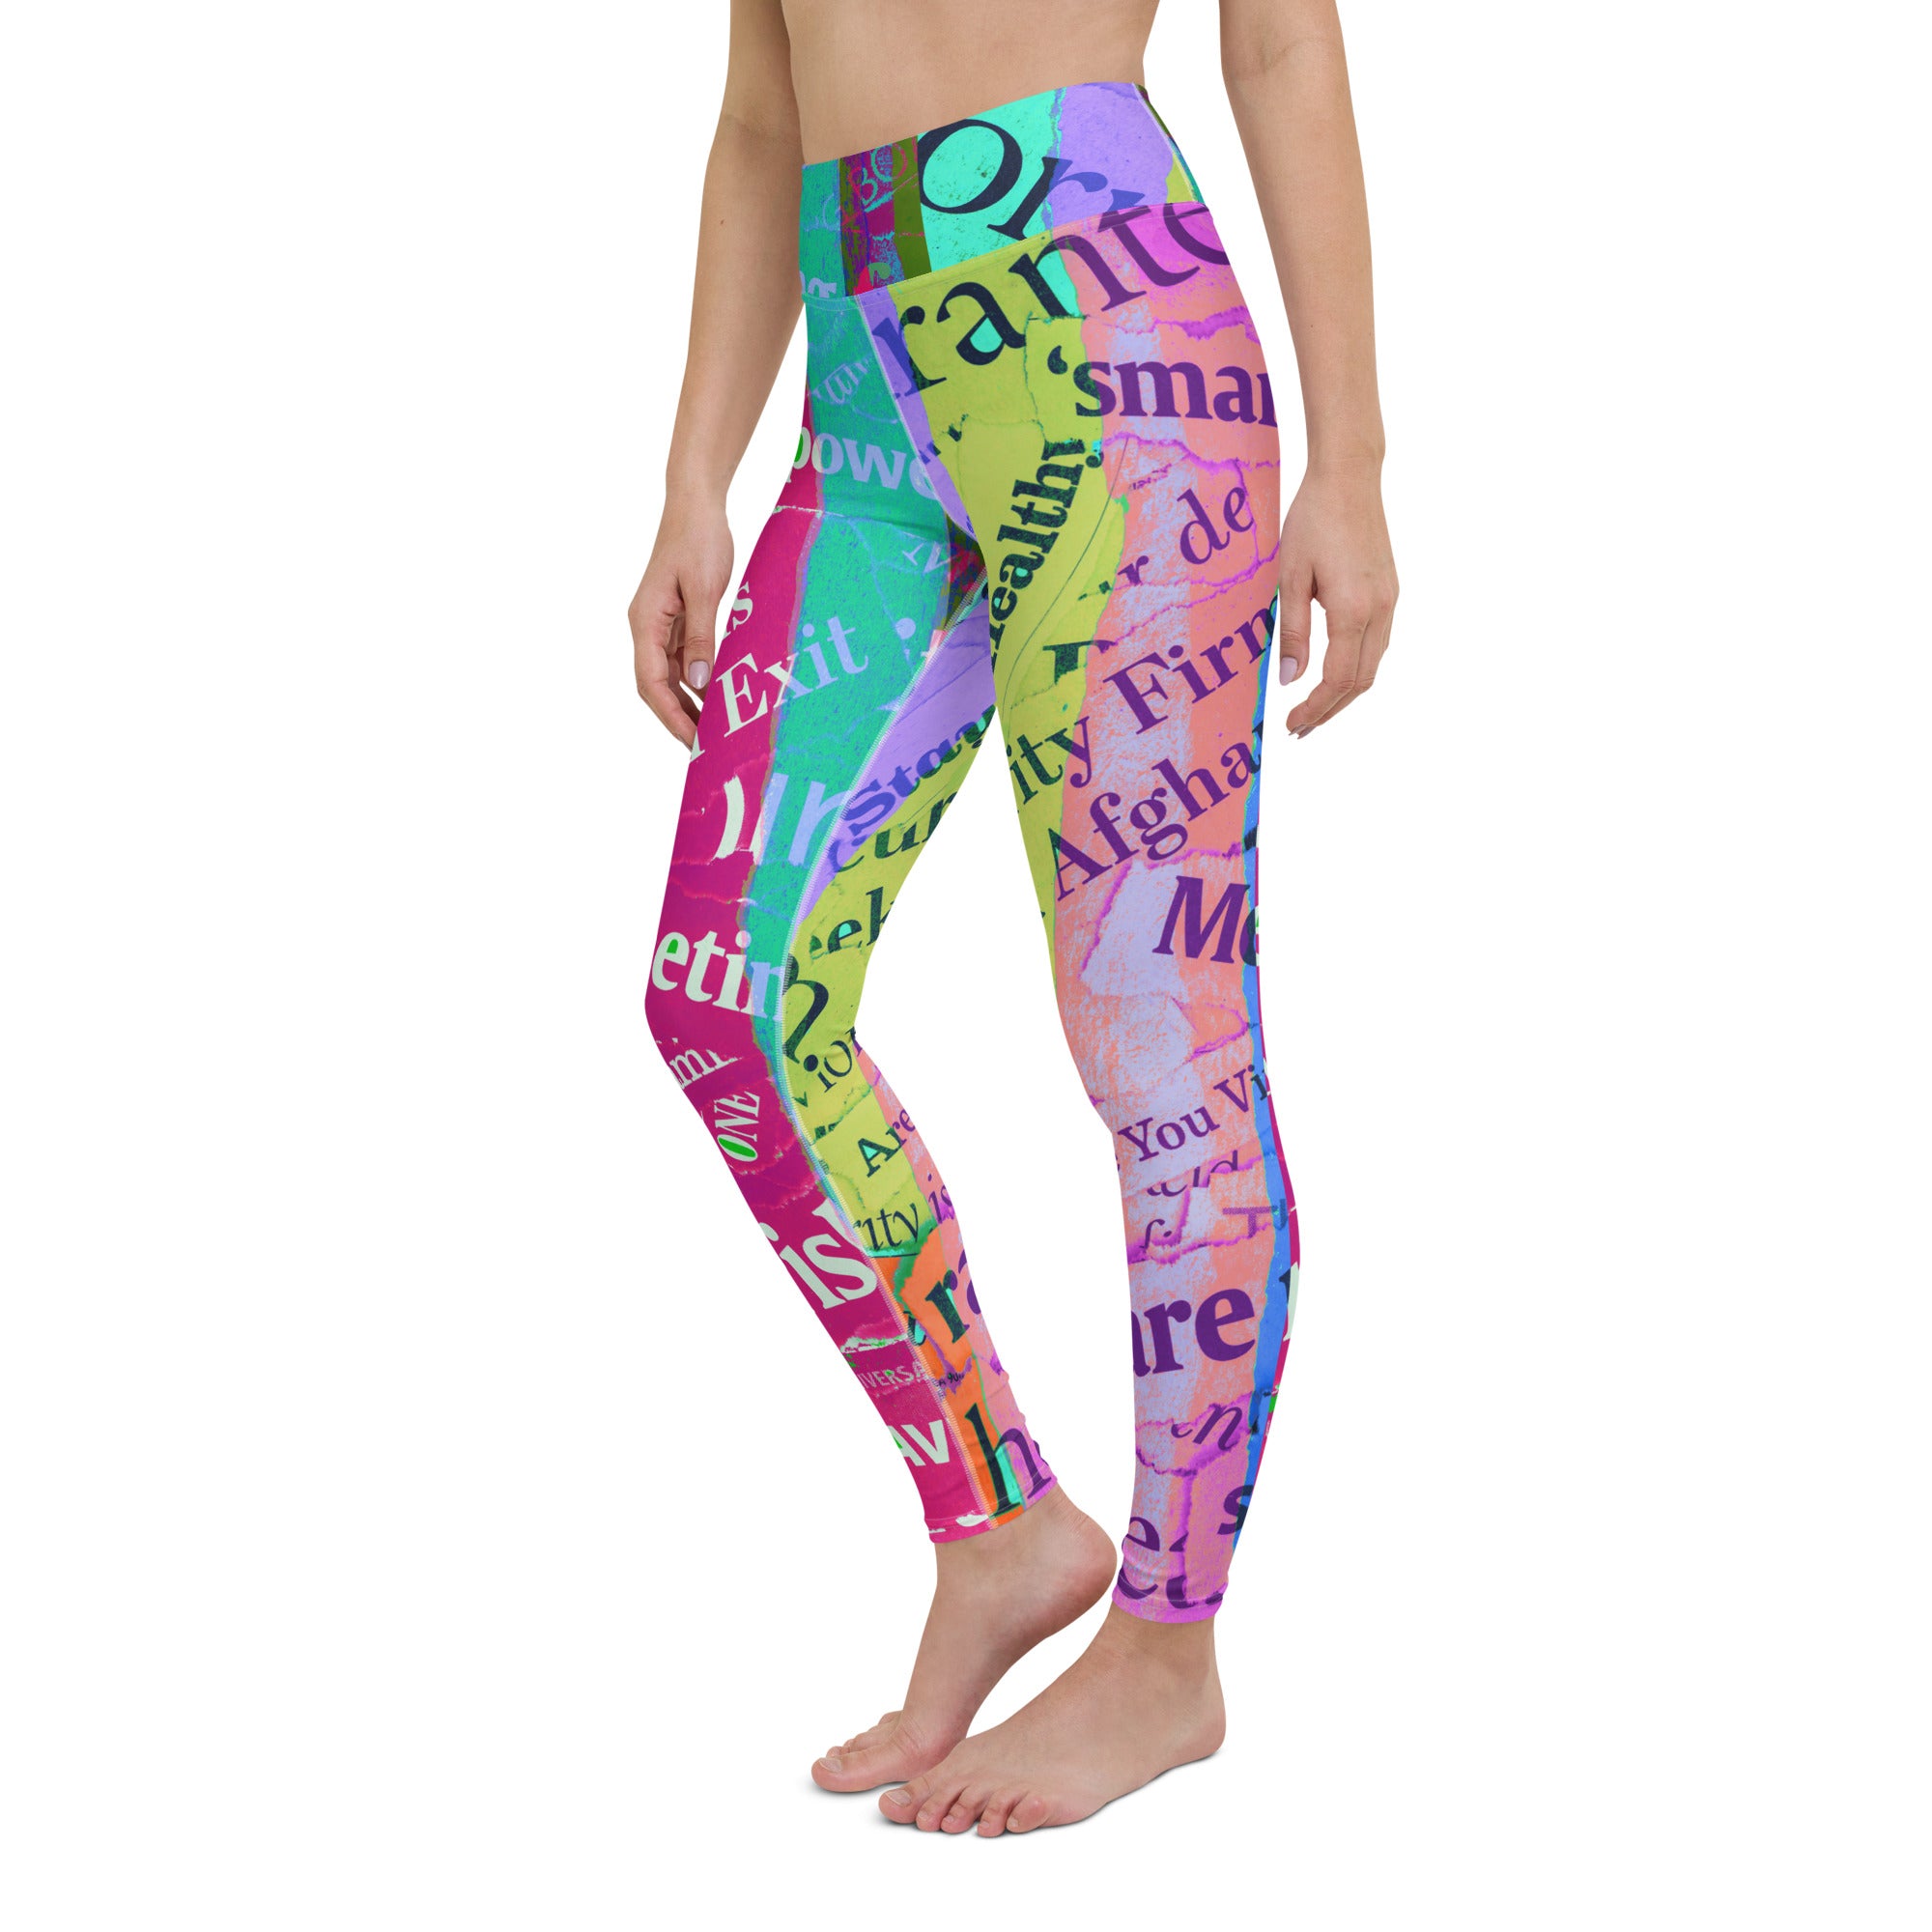 Classified Chic Yoga Leggings paired with a yoga mat and accessories.